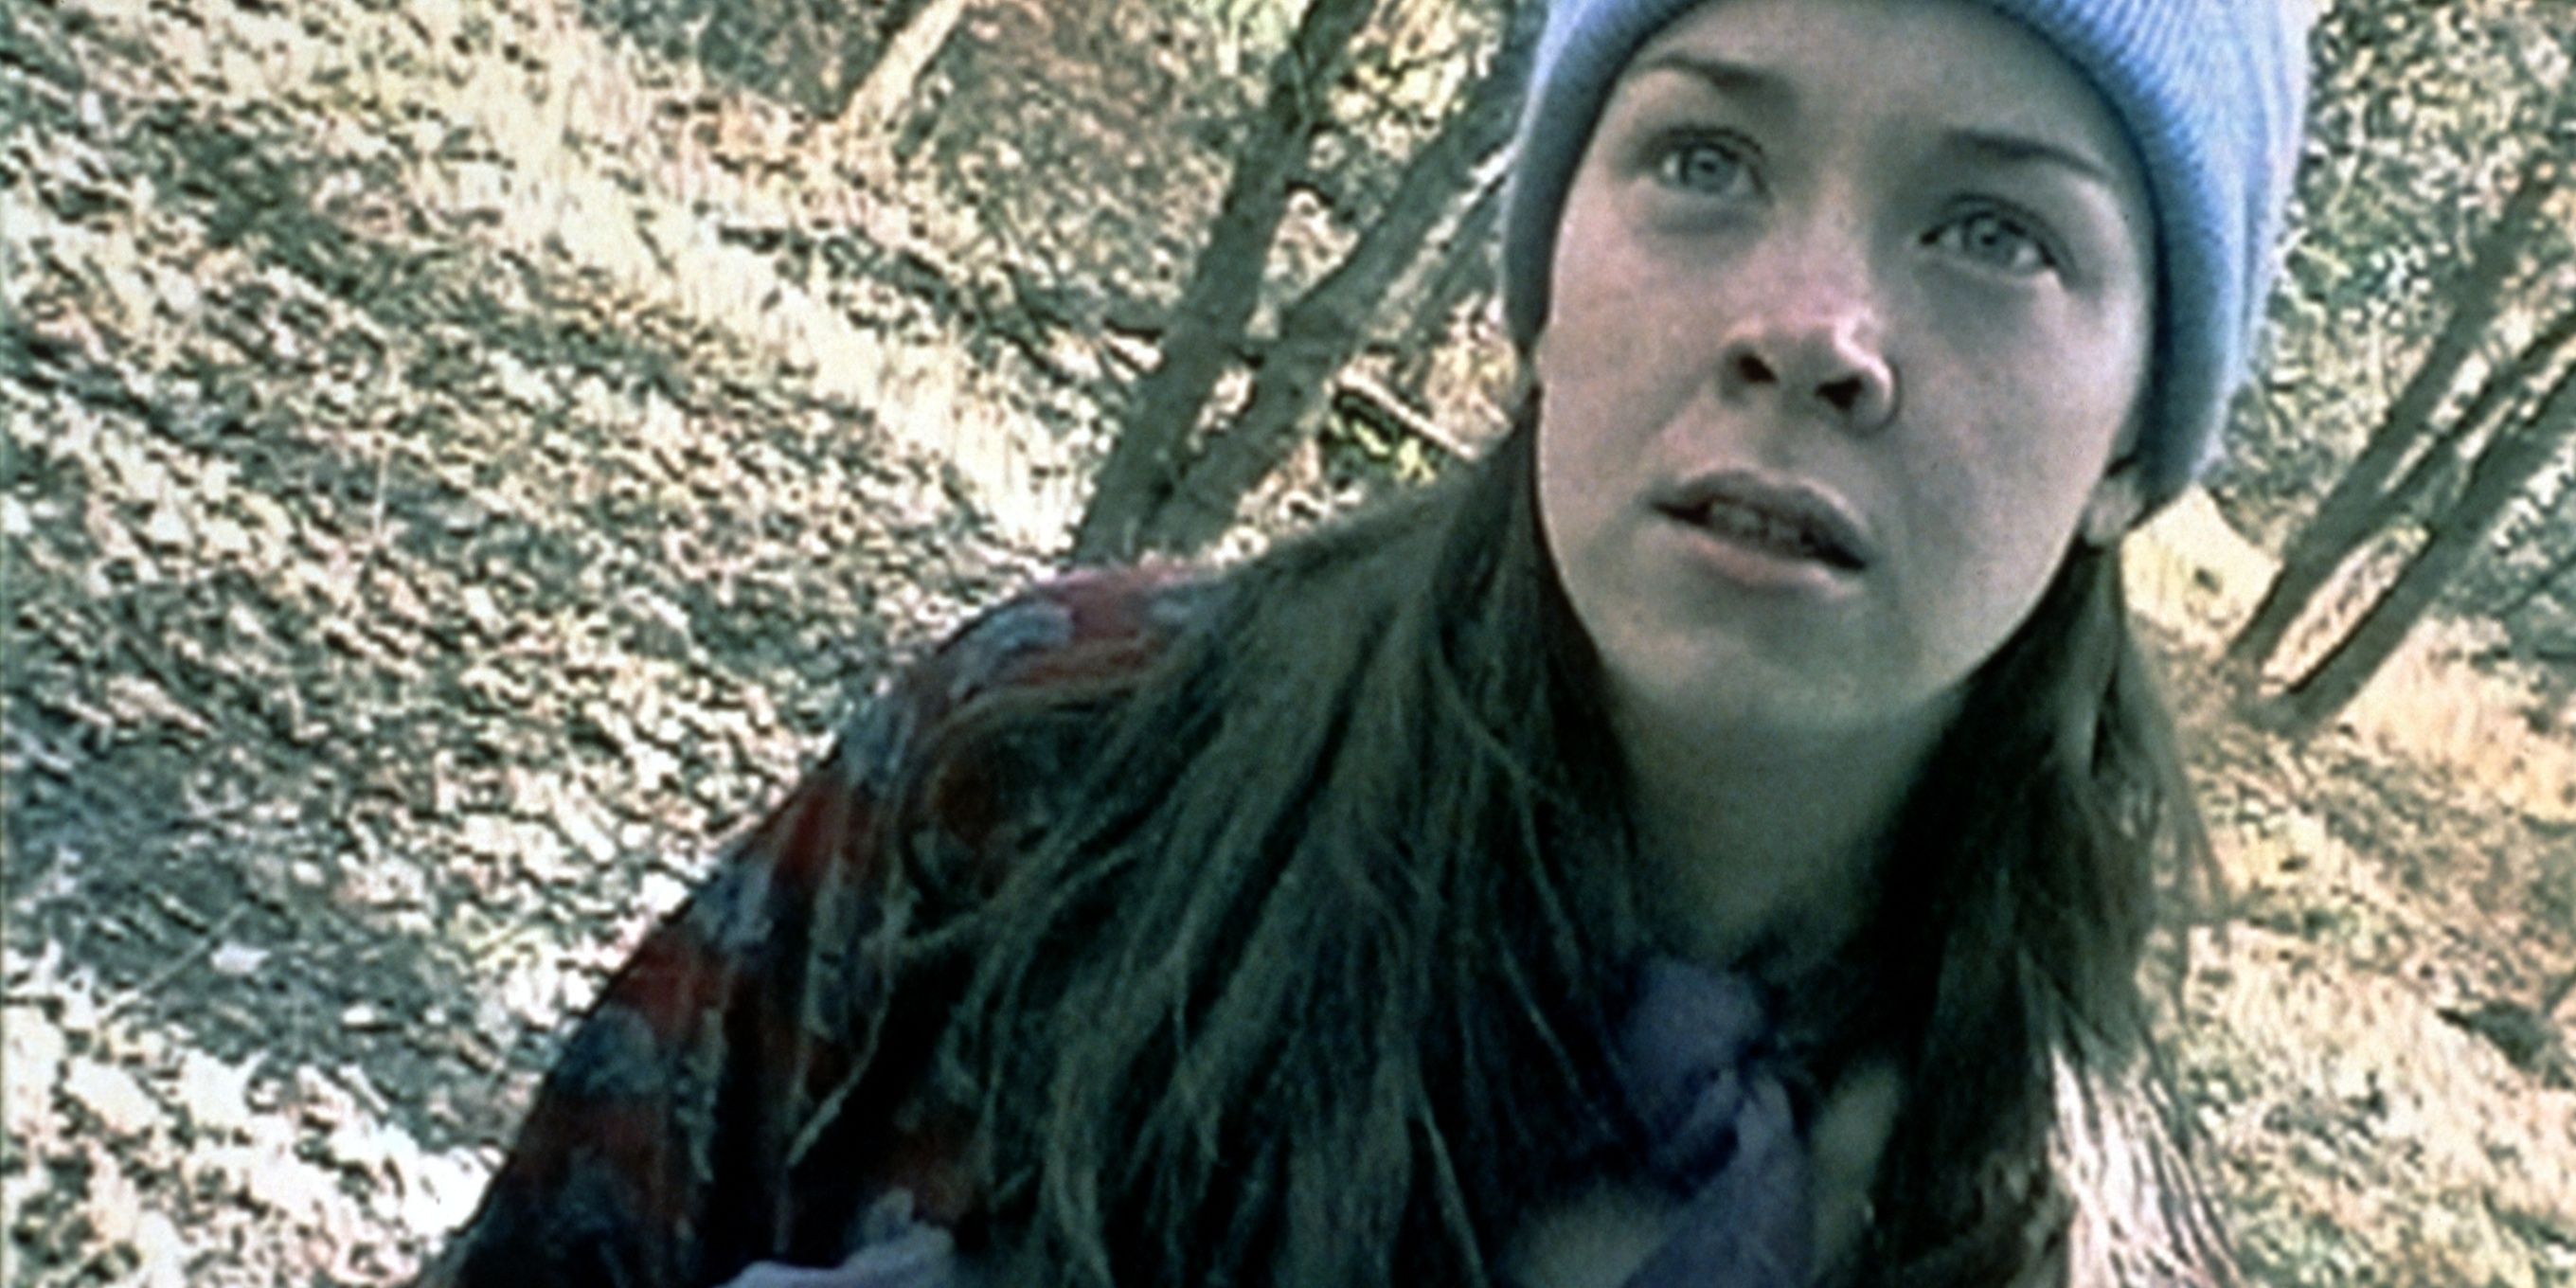 Heather from The Blair Witch Project lost in the woods.